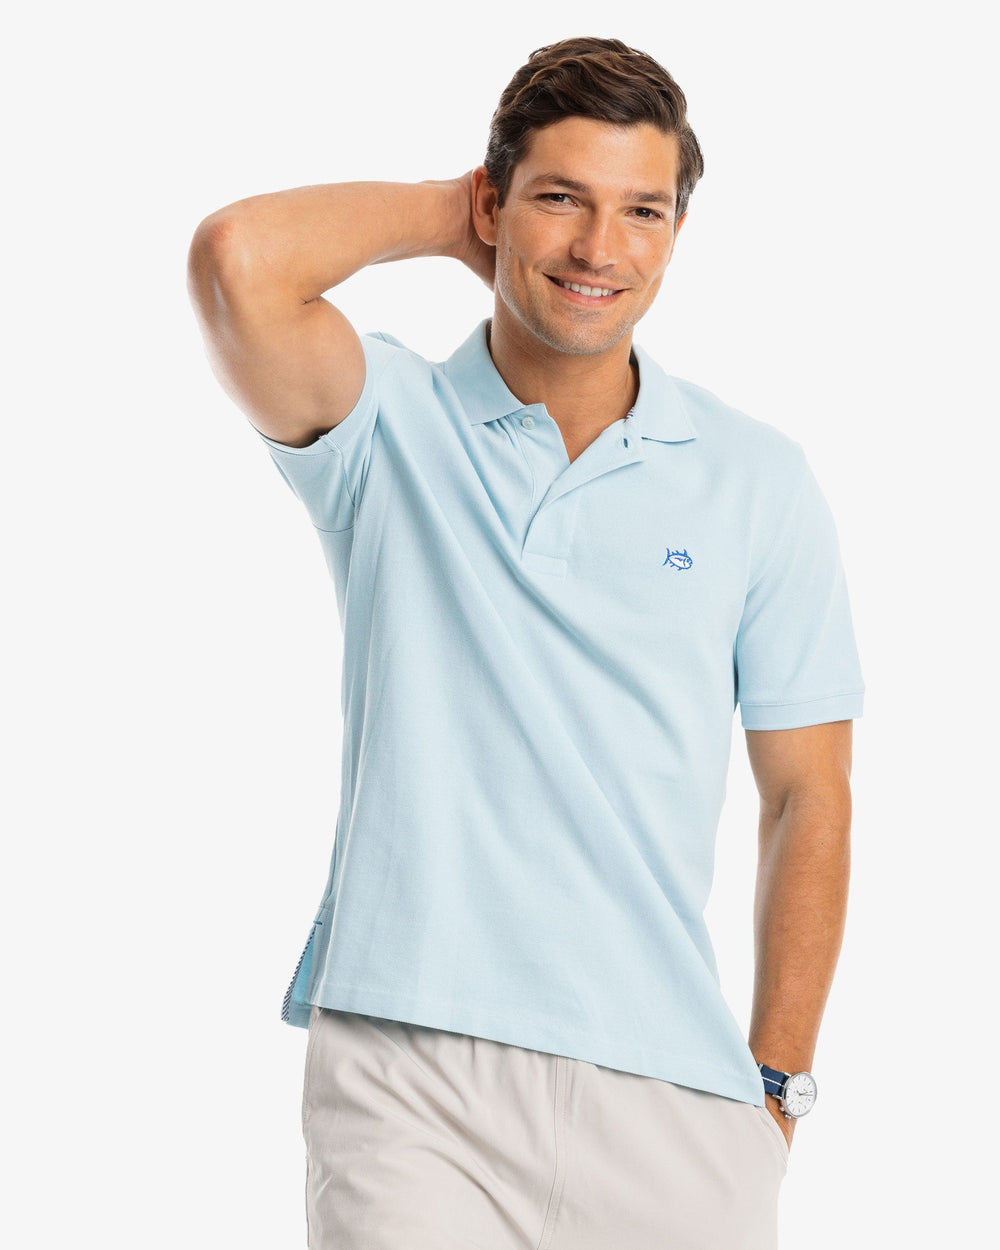 The model front view of the Men's New Skipjack Polo Shirt by Southern Tide - Aquamarine